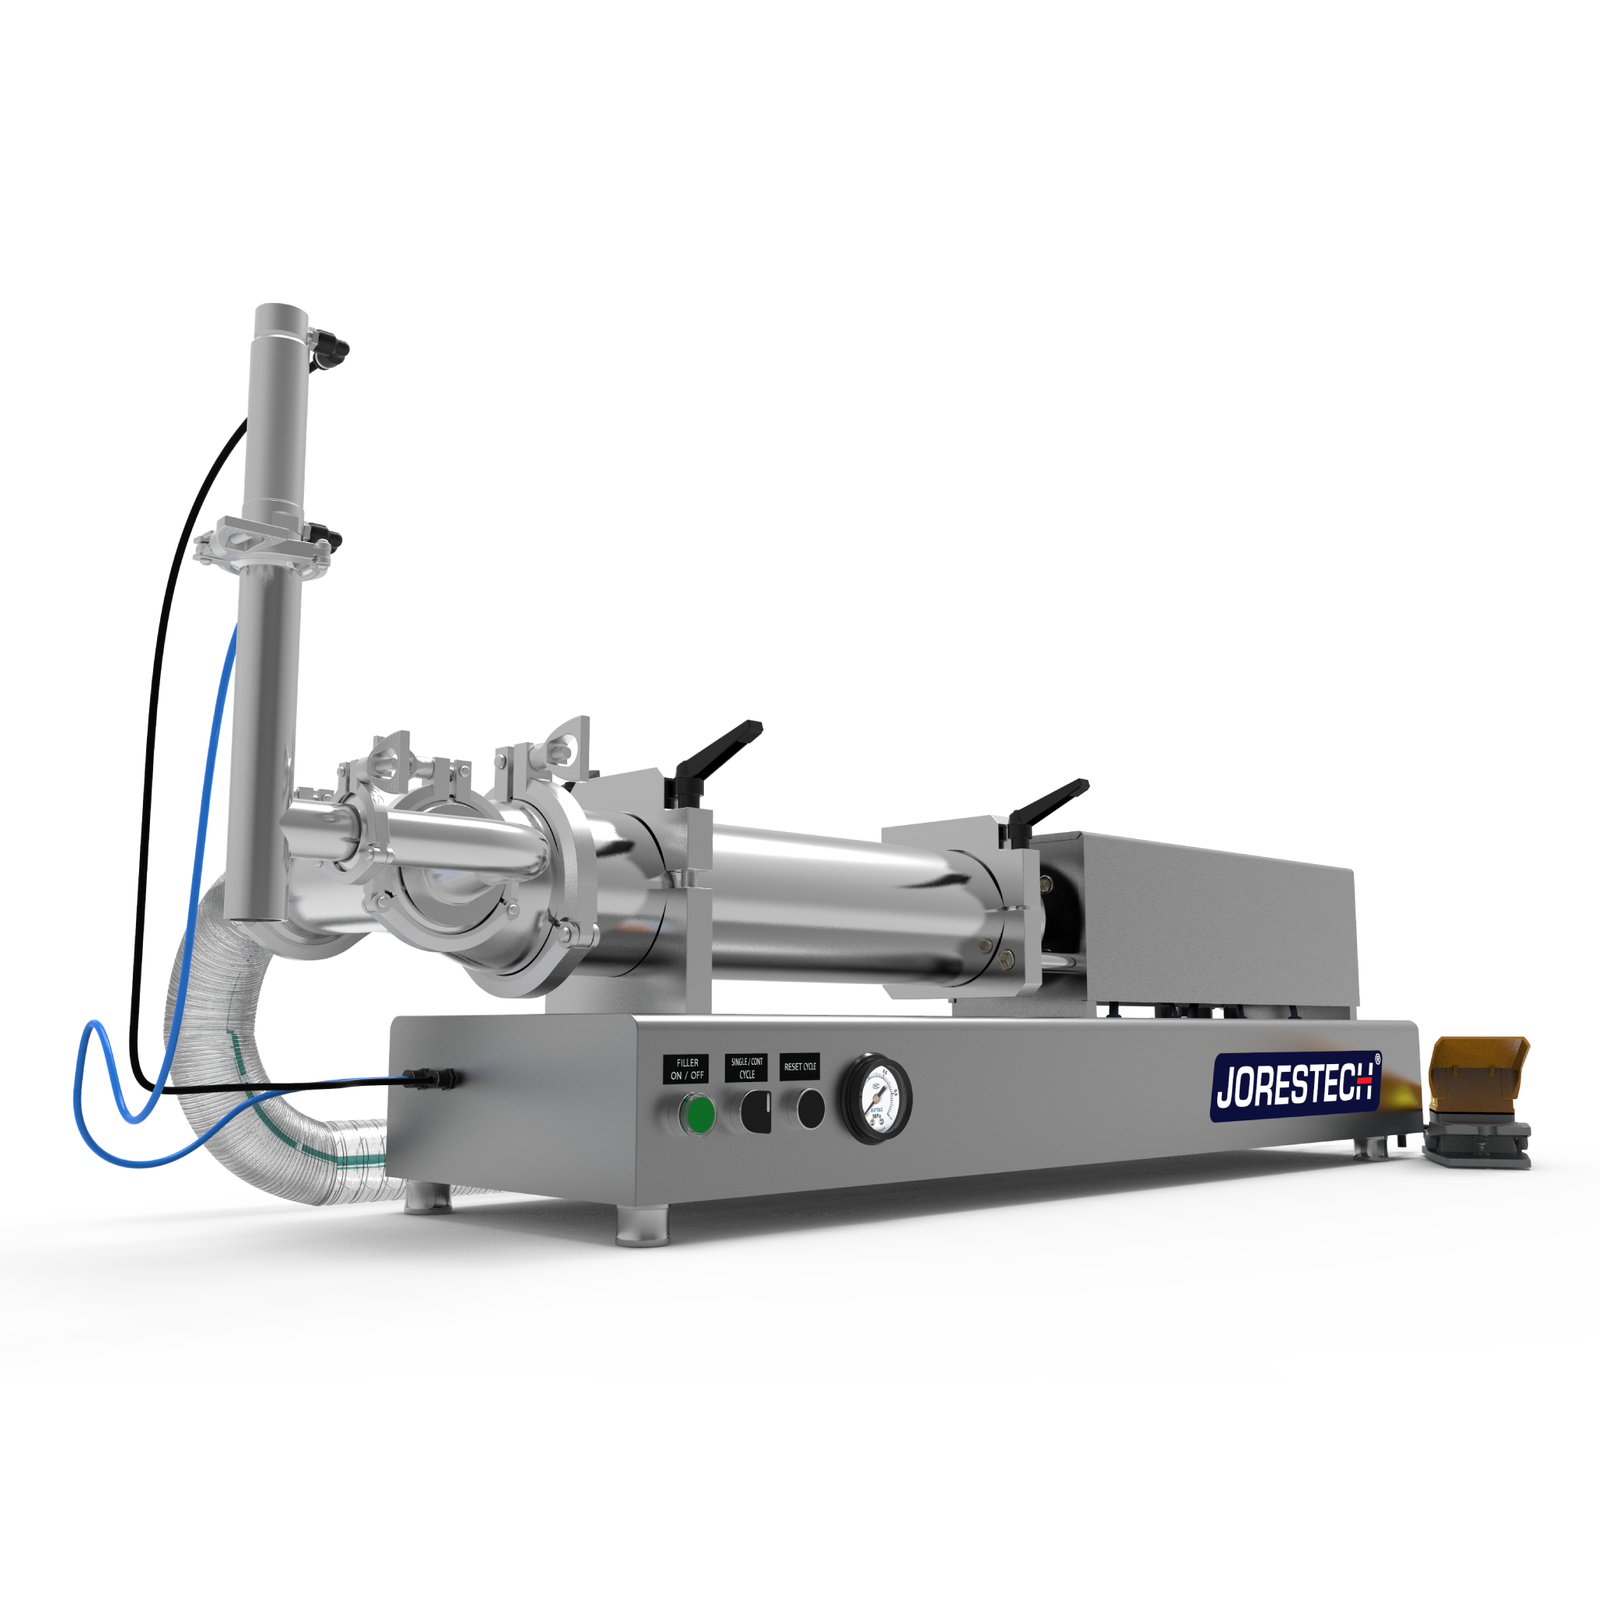 Low viscosity JORES TECHNOLOGIES® piston filling machine. The piston filler is made out of stainless steel and there's a yellow and grey foot pedal resting on the side which is part of the filler.